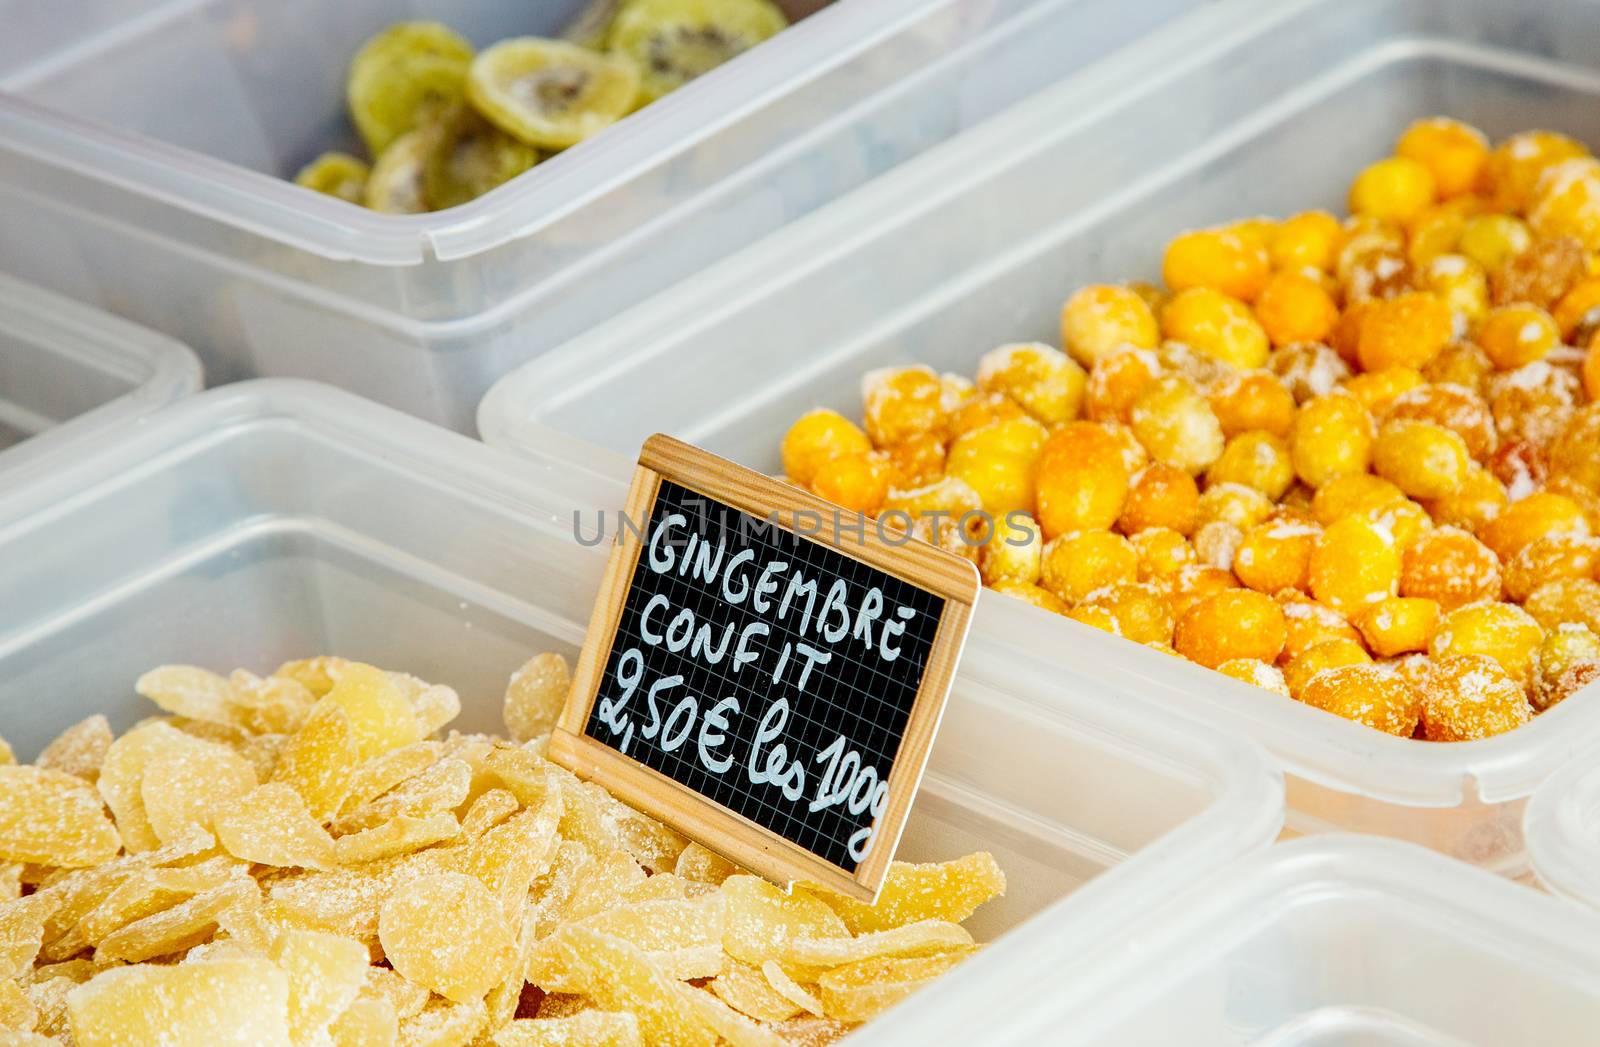 Candied ginger ("gingembre confit" in French) at the food market by pixinoo